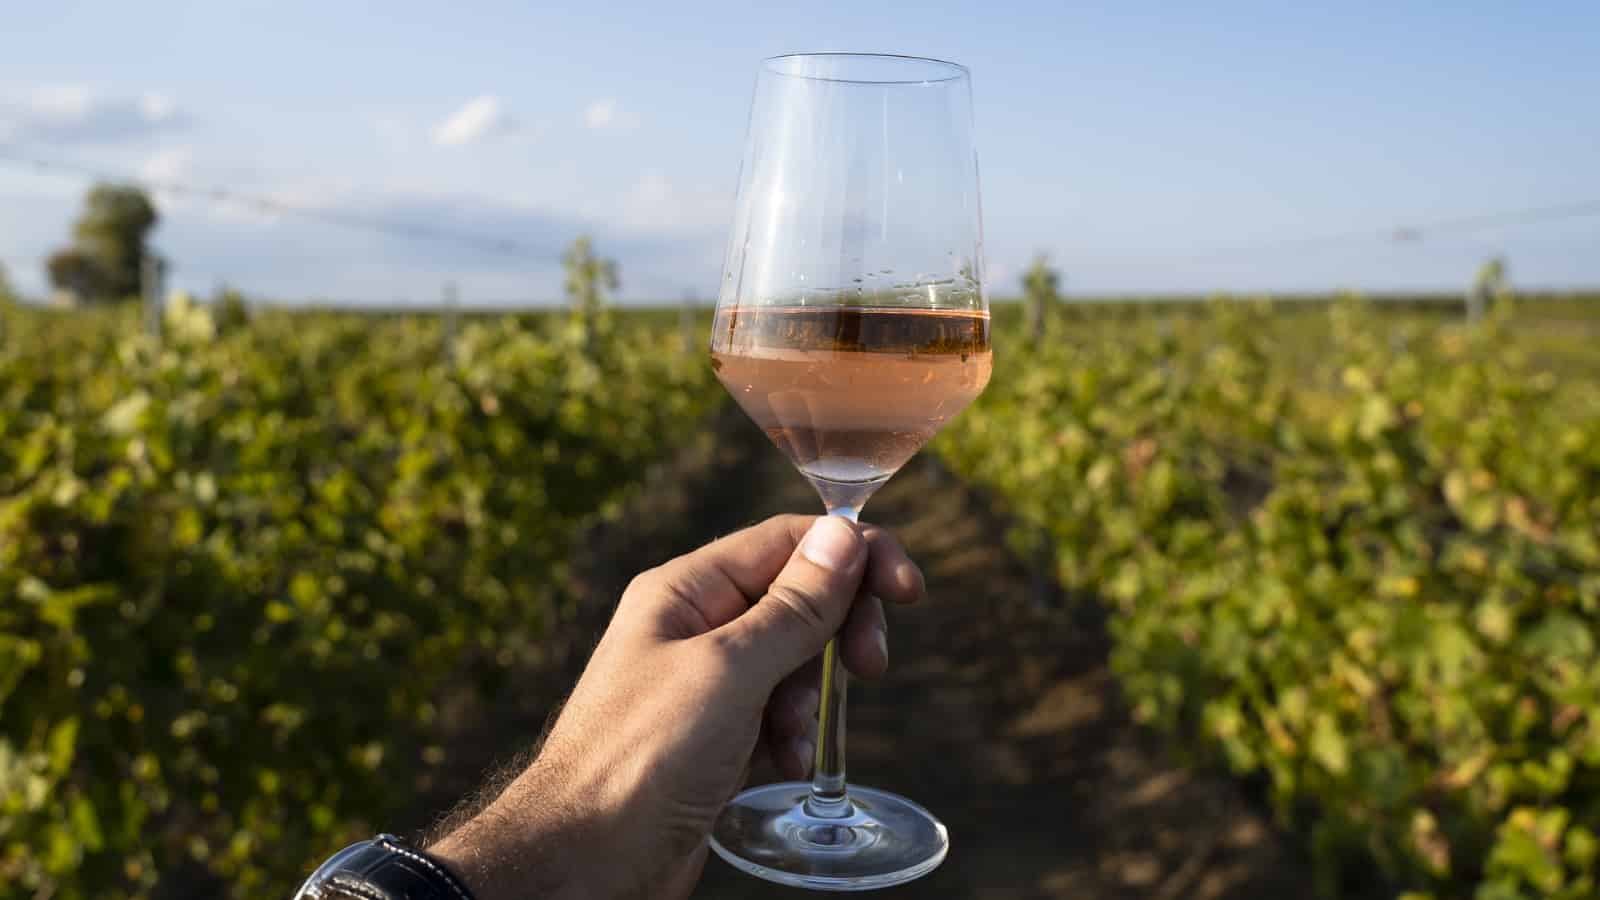 Hand holding a glass of rose wine in front of vineyard